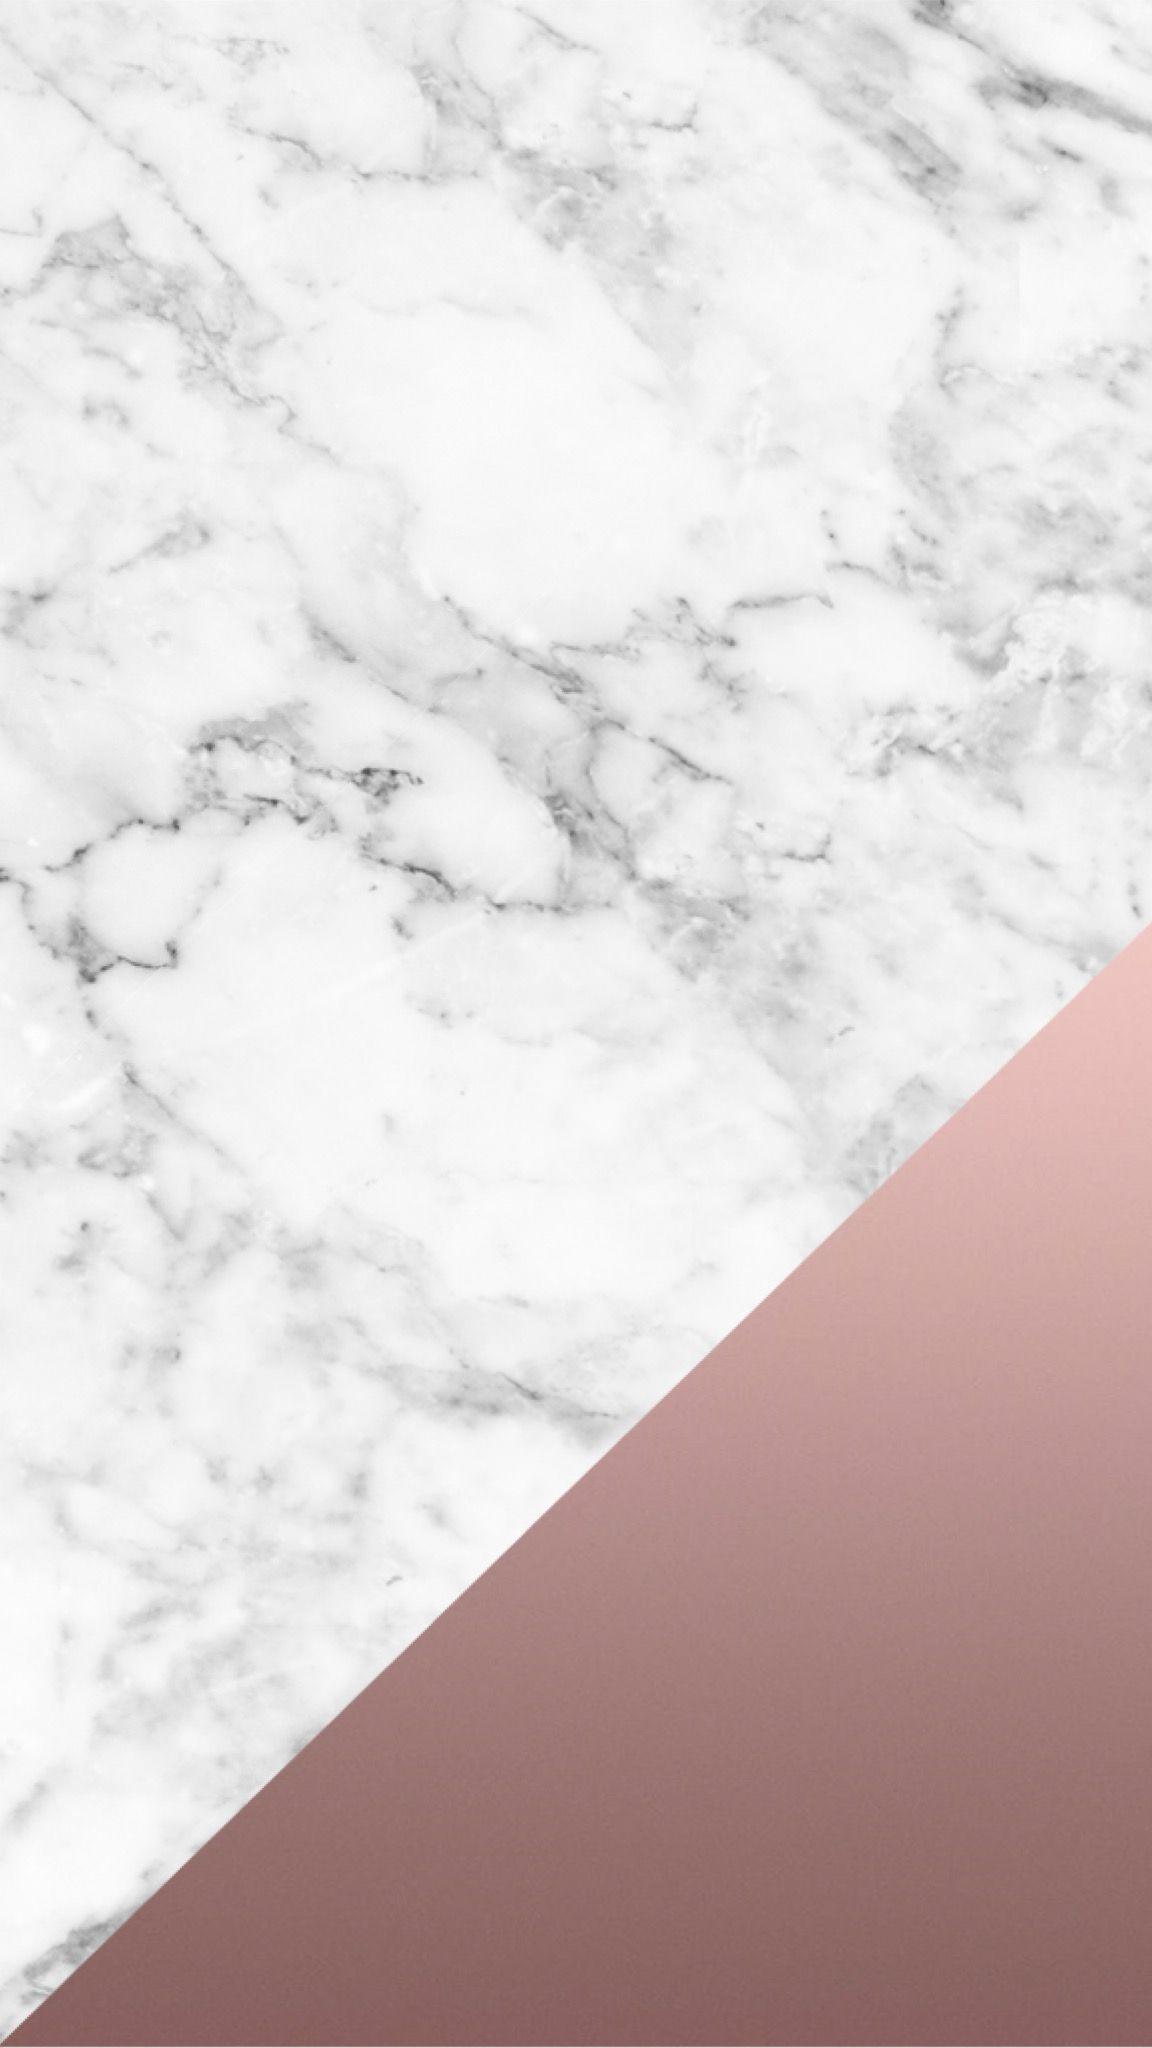 Rose Gold Marble Wallpapers Top Free Rose Gold Marble Backgrounds Wallpaperaccess Rose gold aesthetic cute tumblr wallpapers. rose gold marble wallpapers top free